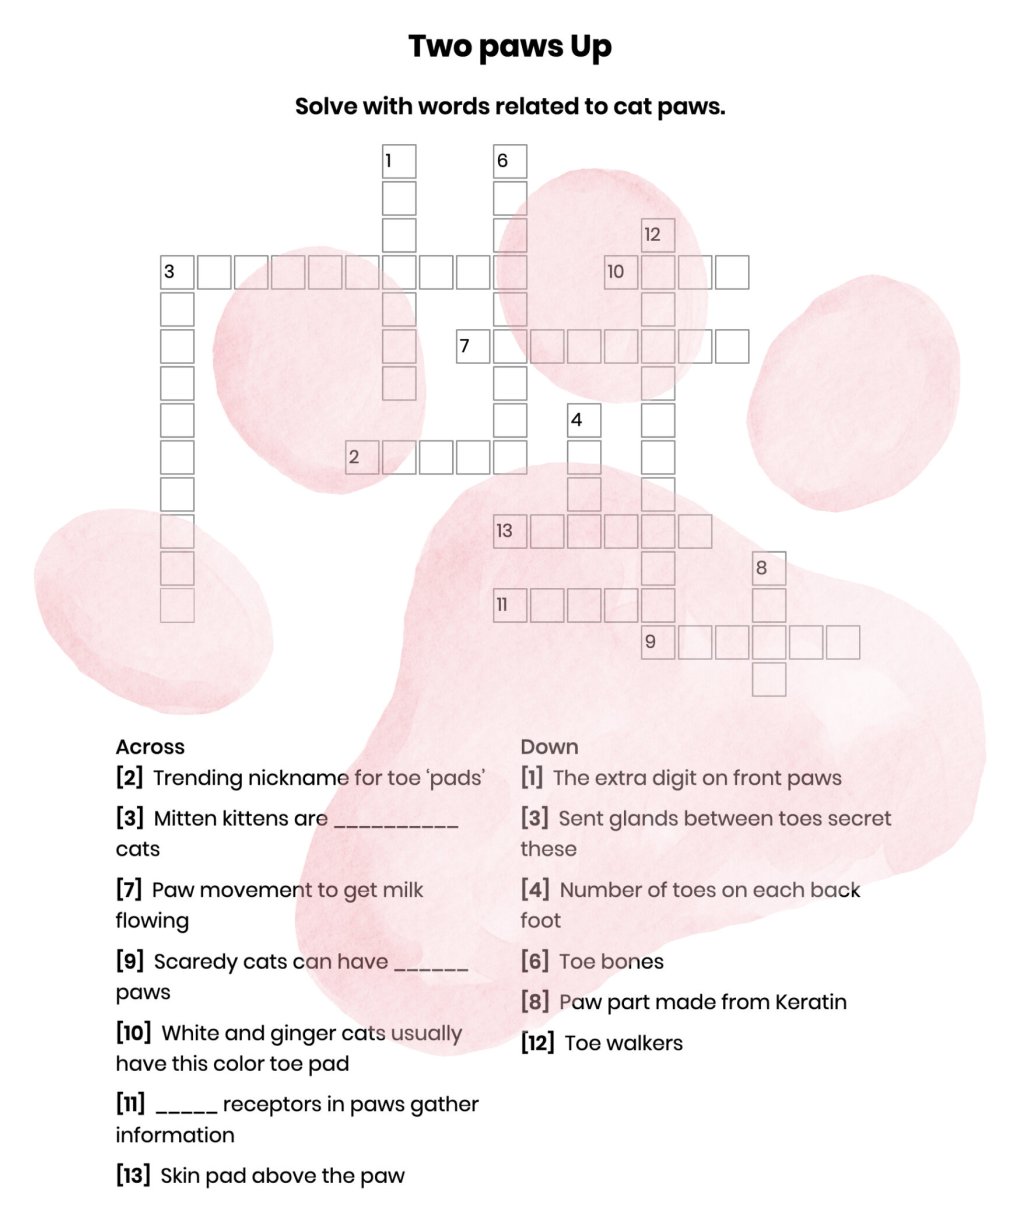 Cat Paw Word Search Puzzle: Test Your Skills and Find the Hidden Words